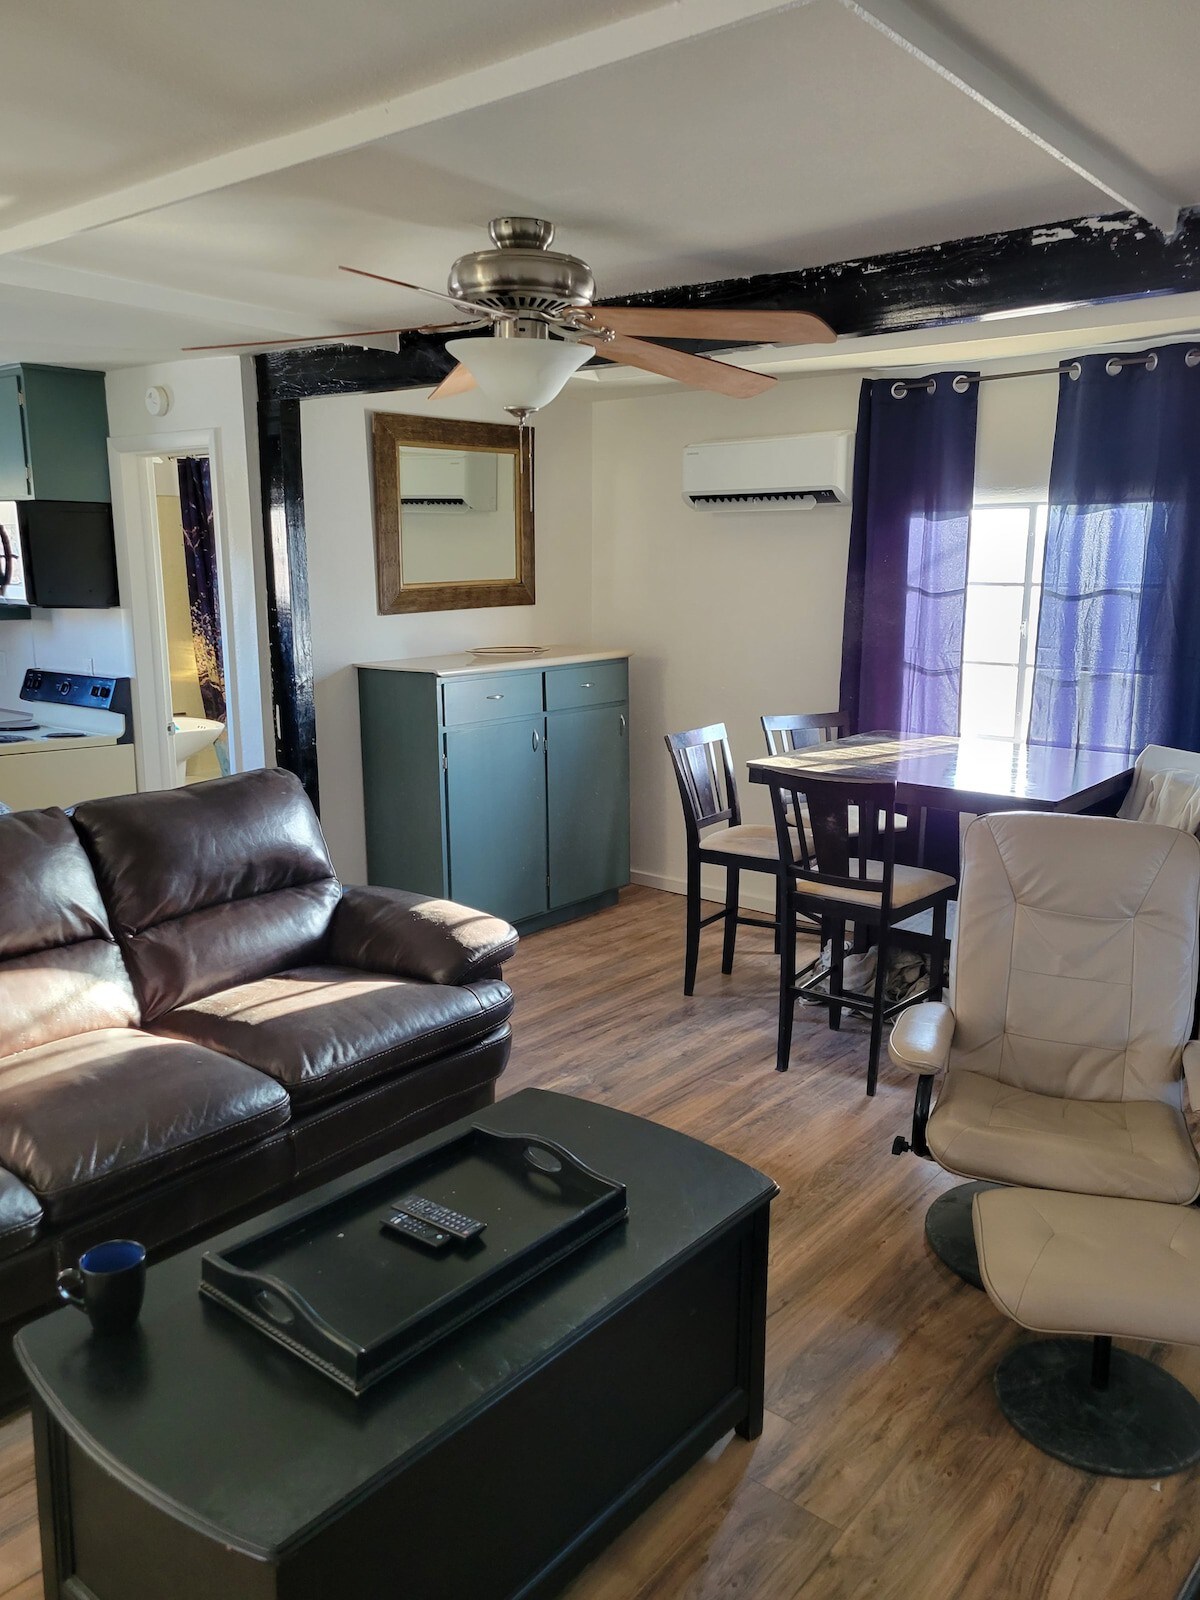 Large 2bd/1 bth apartment with full kitchen